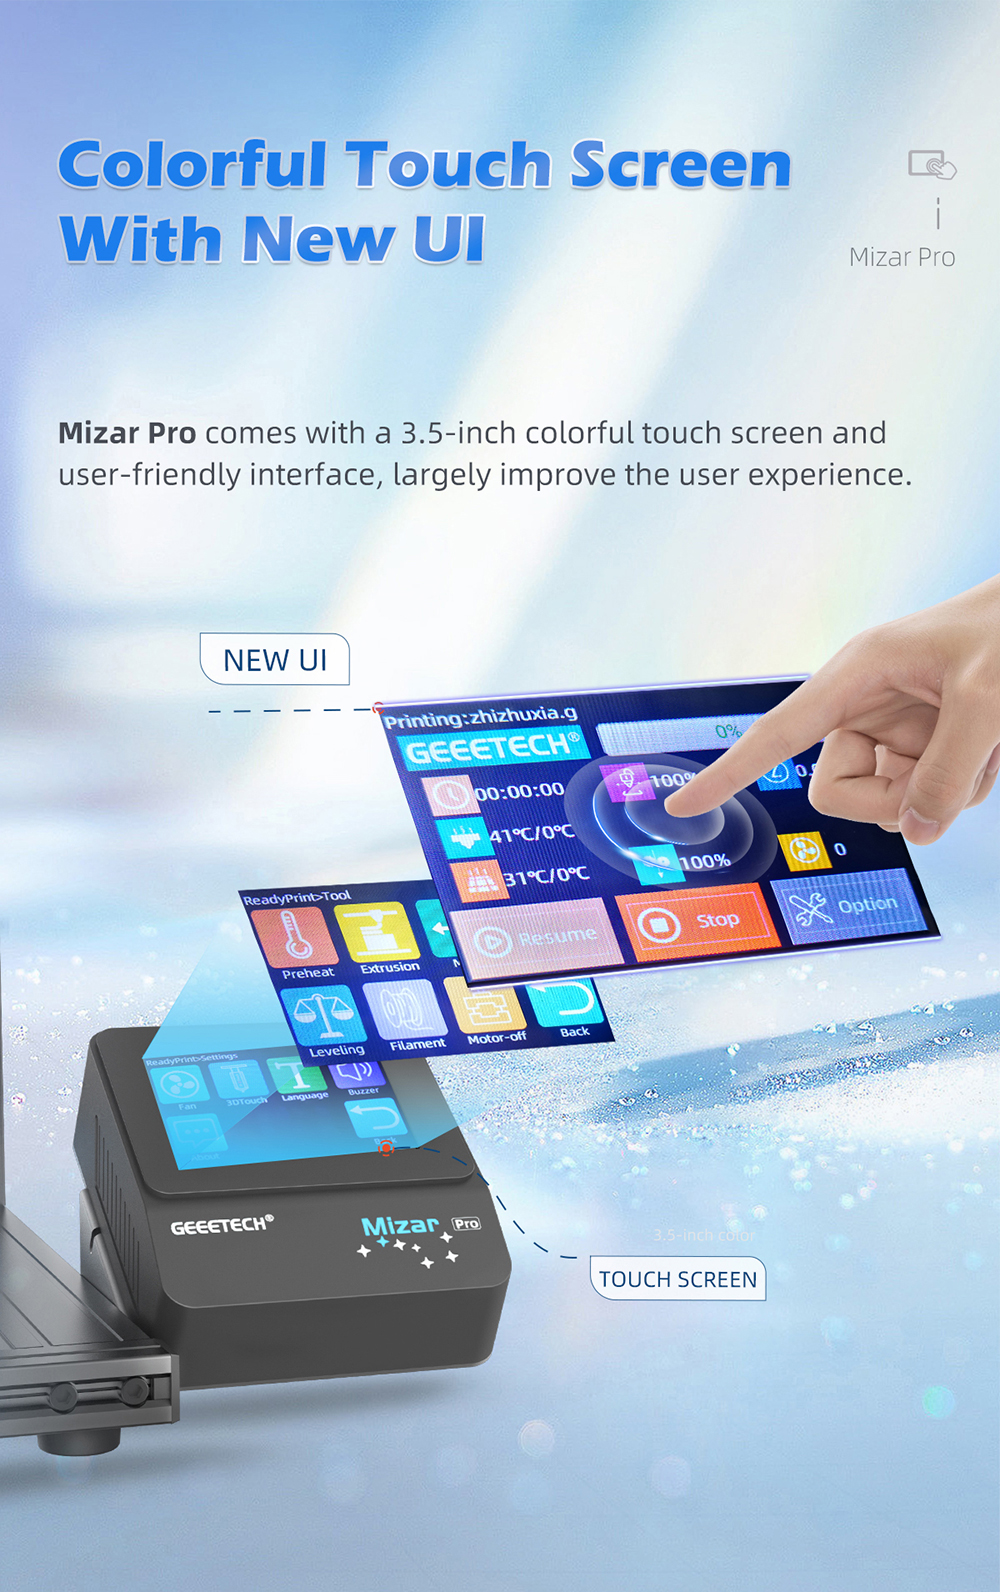 Mizar pro colorful touch screen with new ui